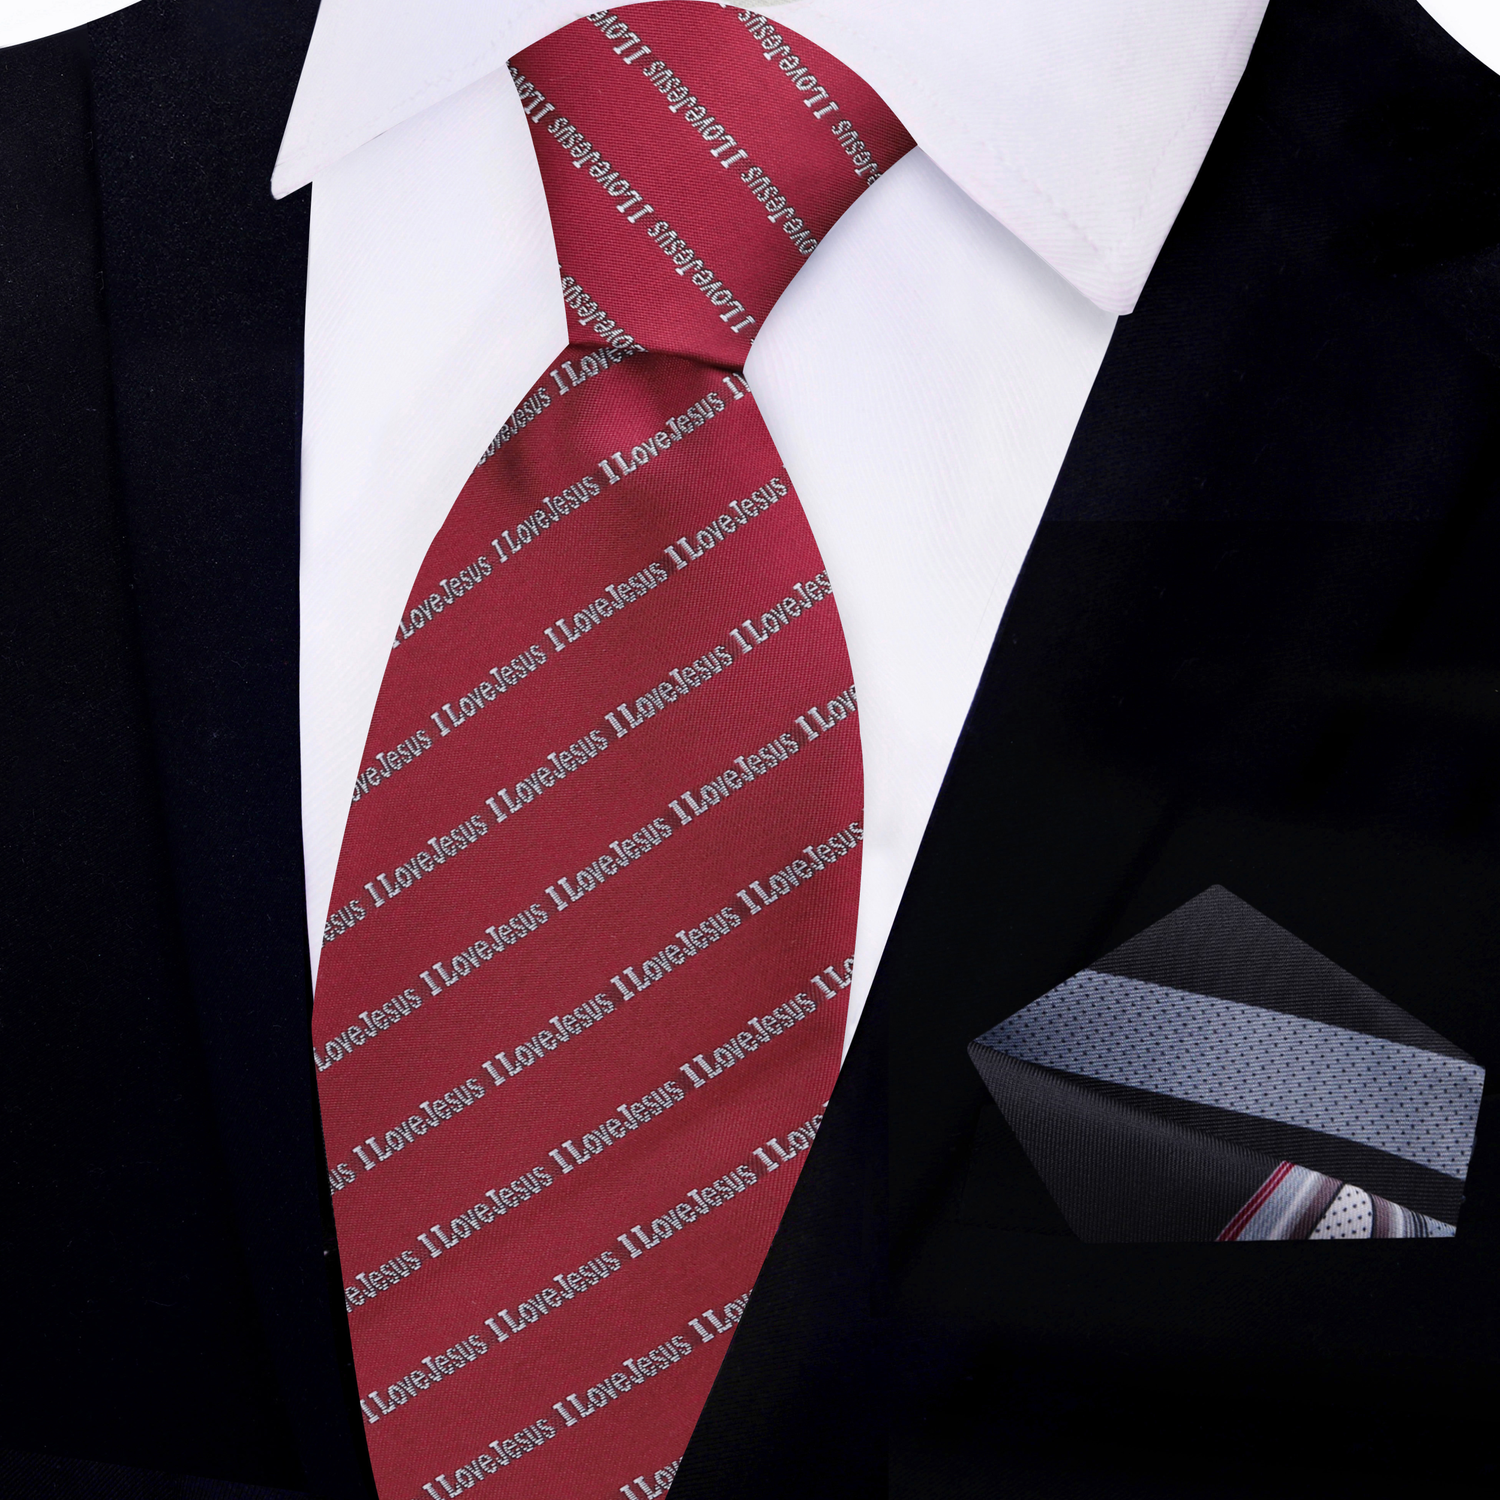 View 2: Carmine Red, Grey I love Jesus Tie and Abstract Black, Grey, Red Square